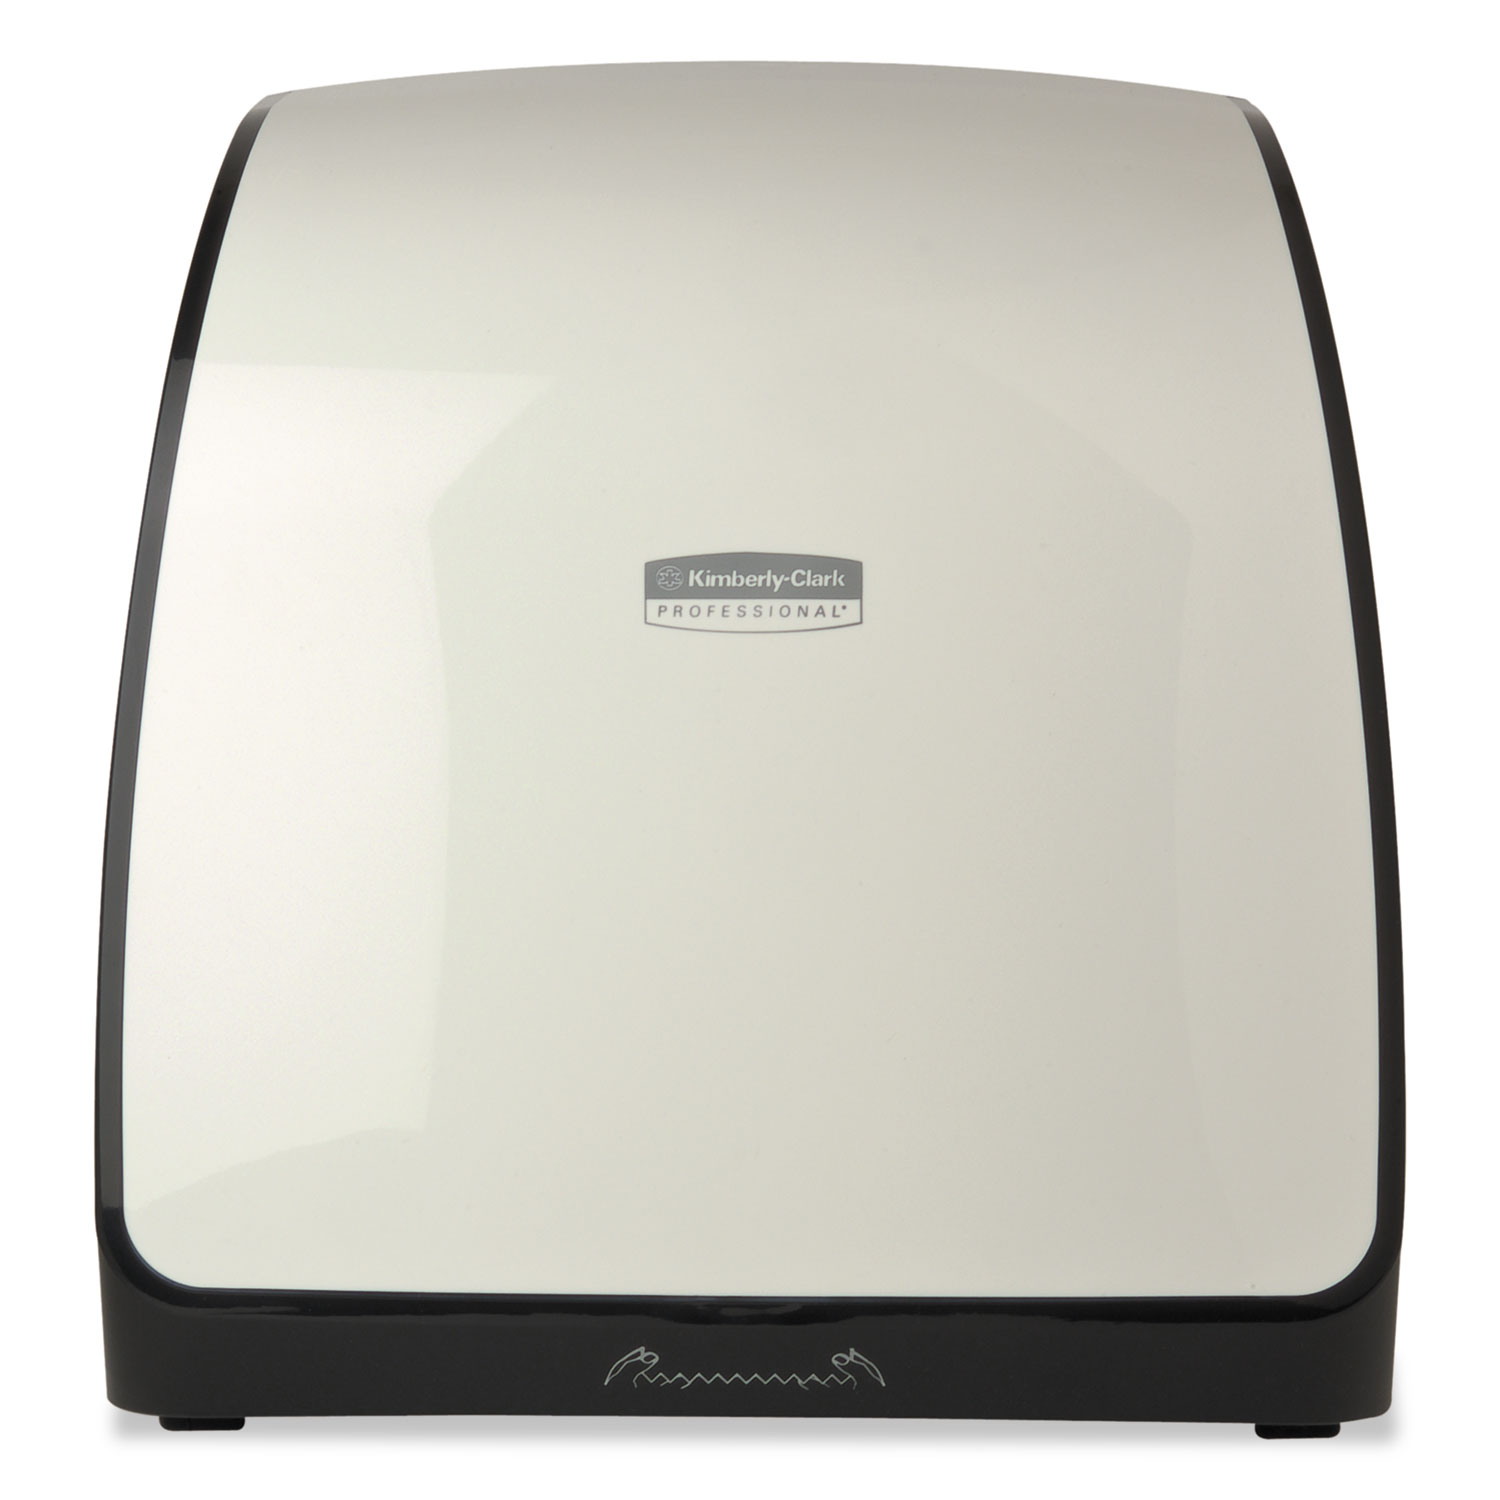 Slimroll MOD Touchless Manual Towel Dispenser, 14 1/5 x 7.9 x 13, White